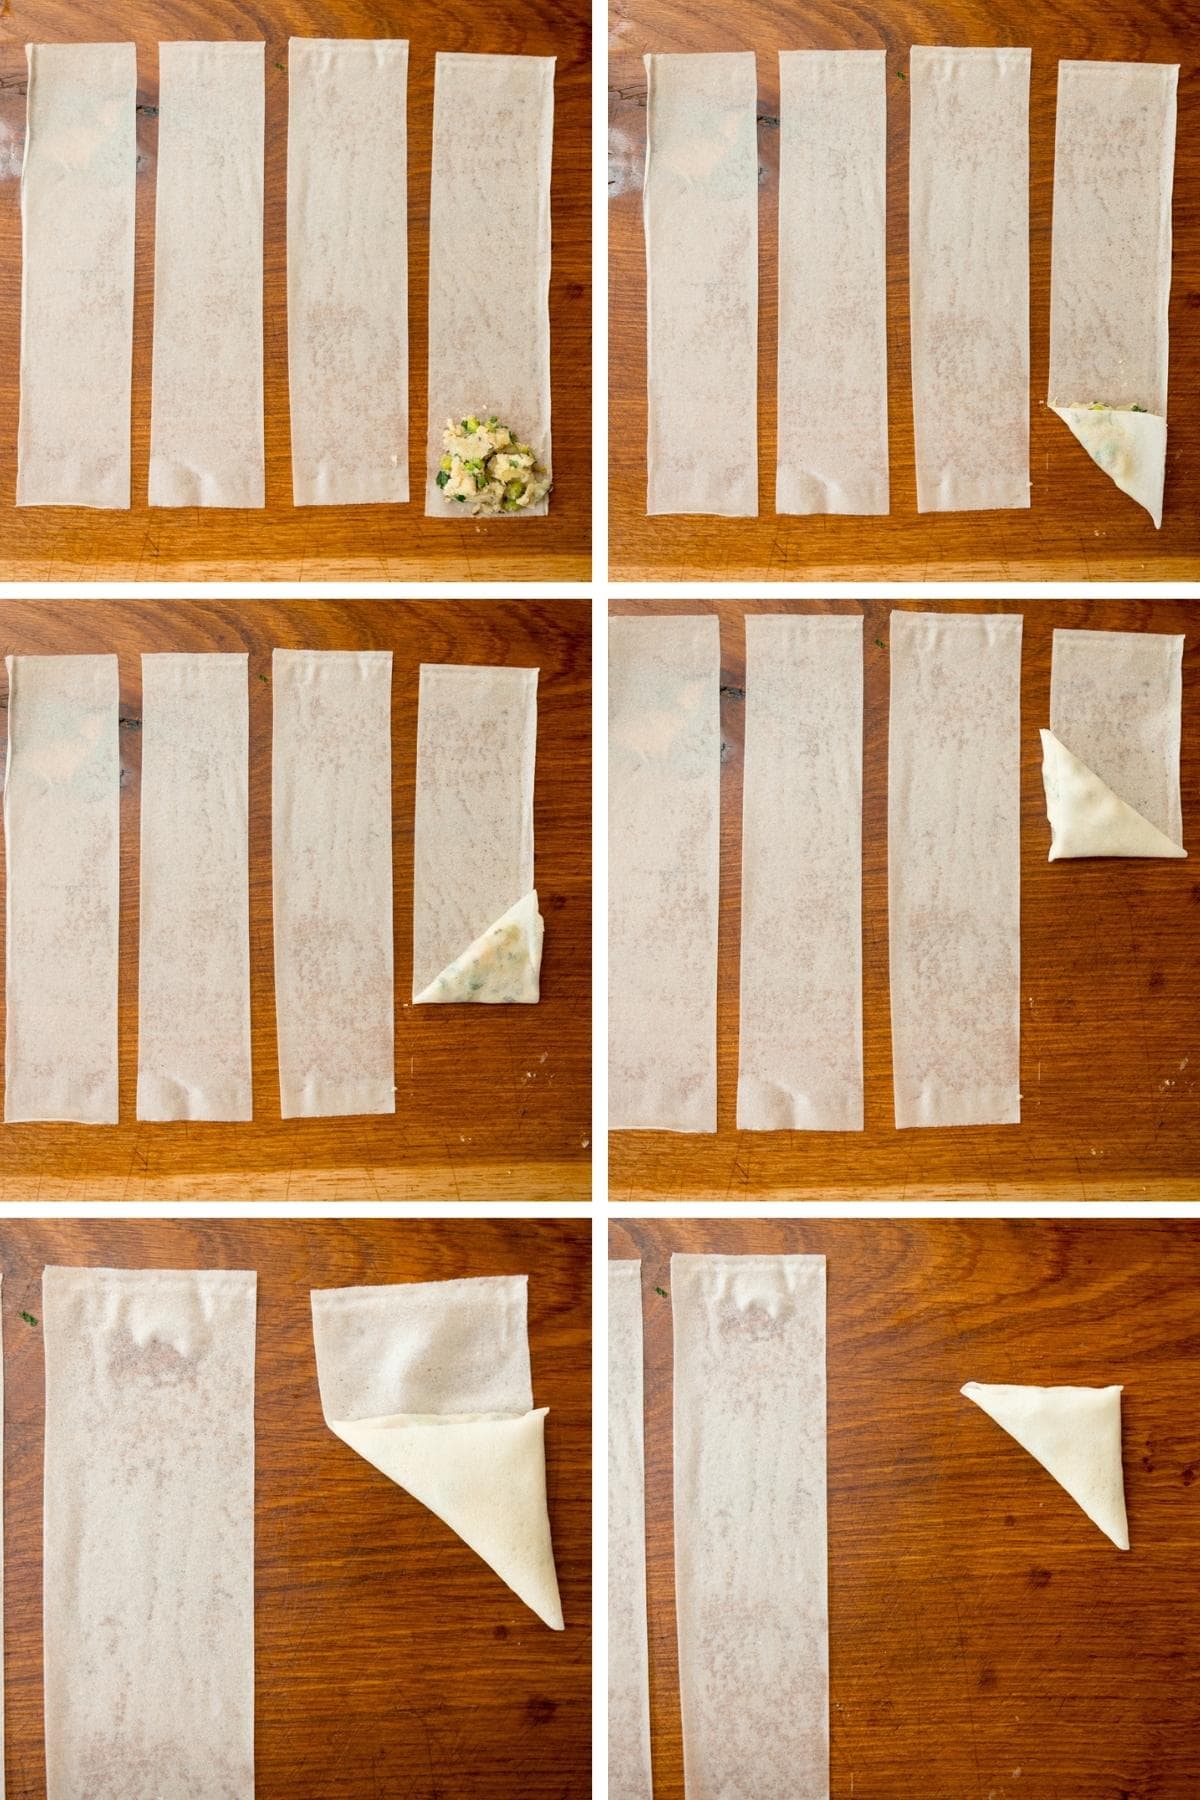 6 image collage showing overhead images of filling and rolling samosas into triangles after placing the filling onto strips of samosa dough.